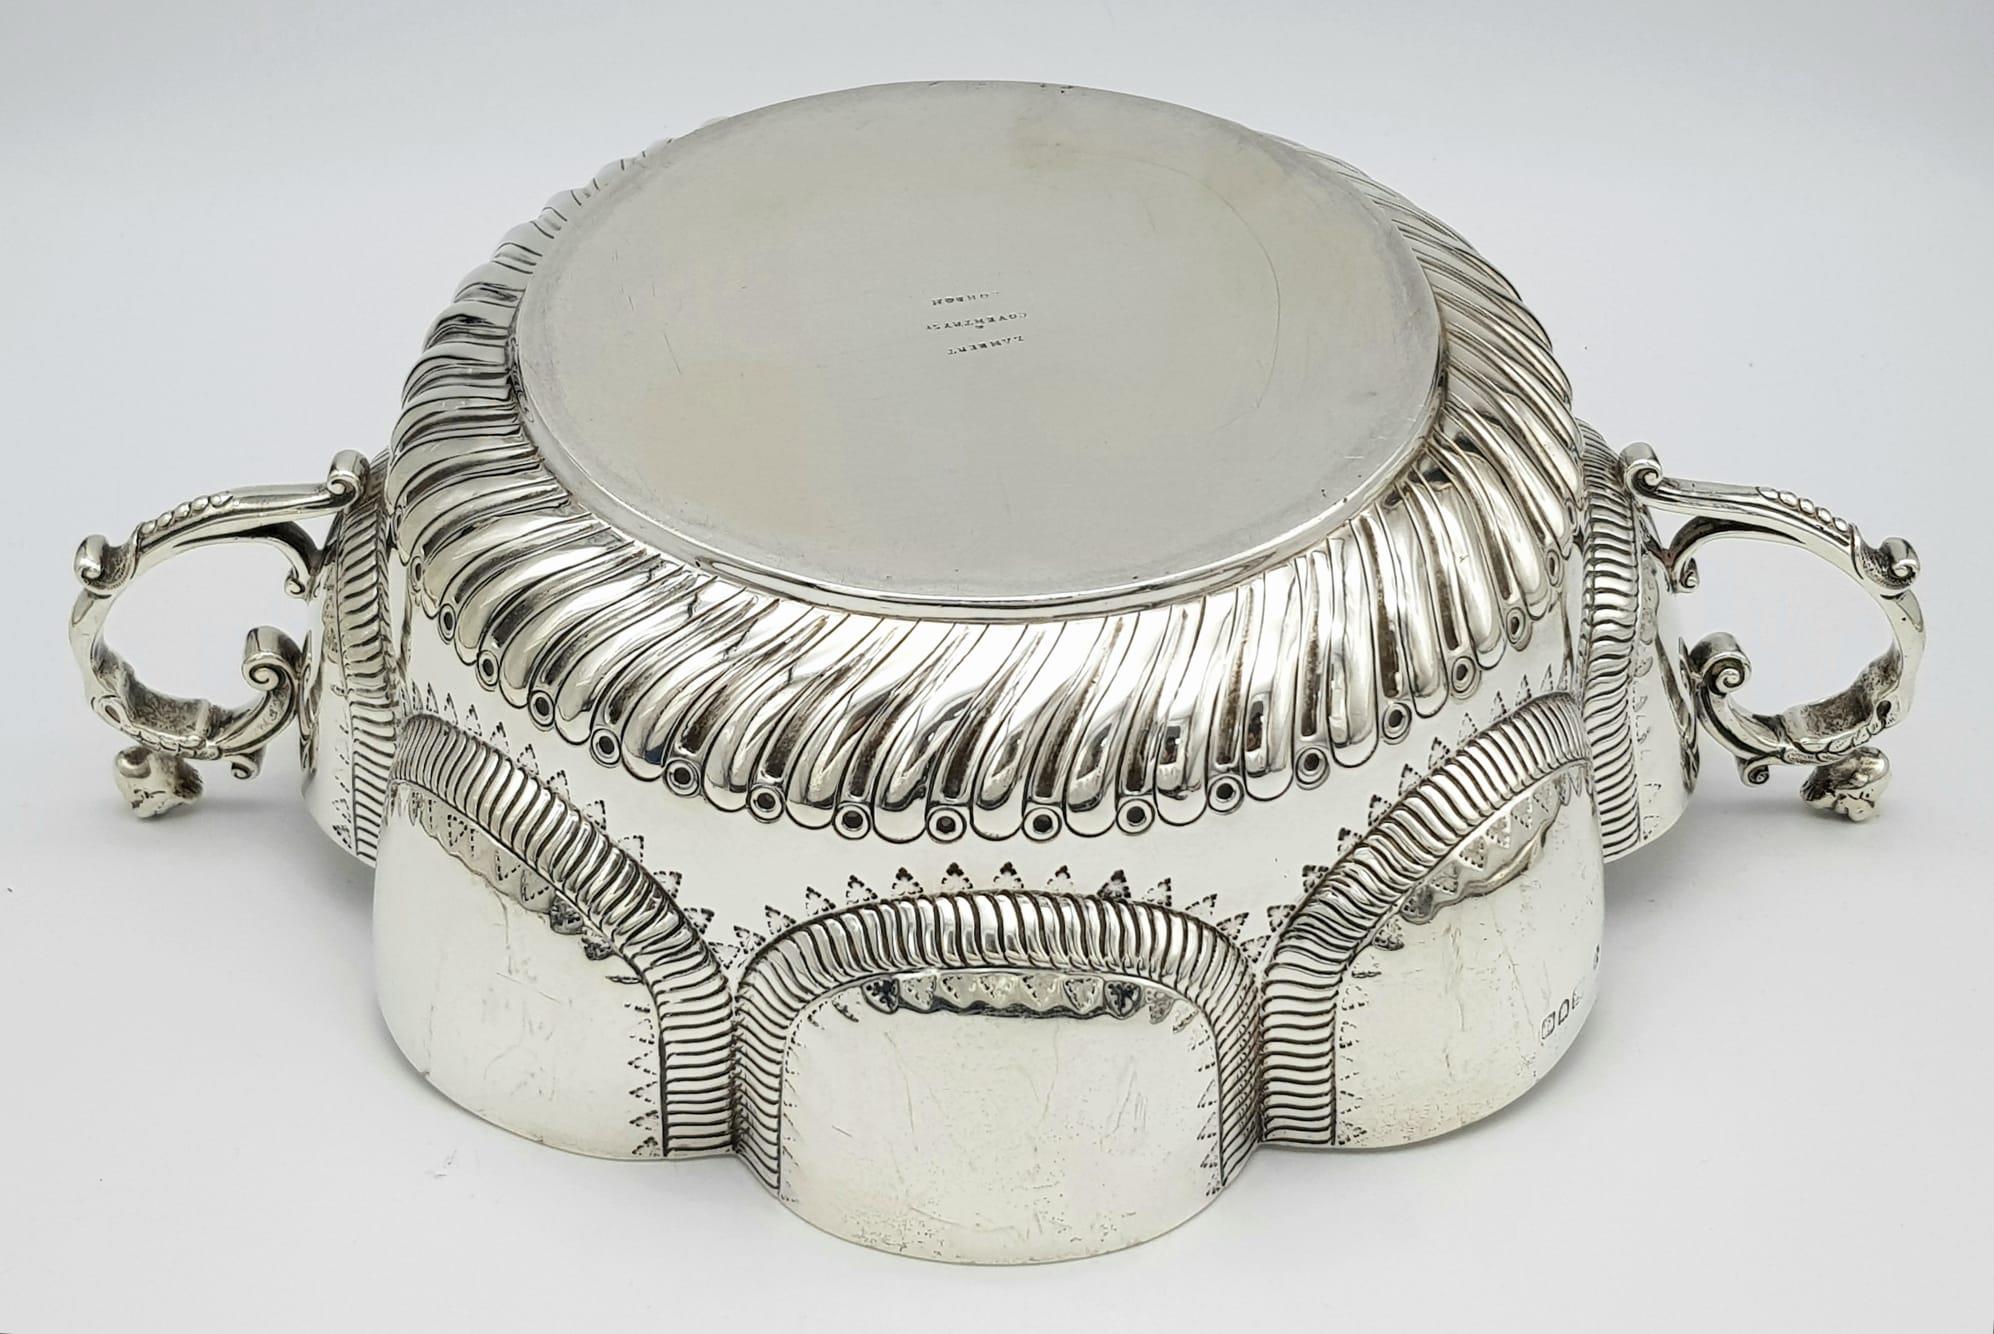 A BEAUTIFULLY ORNATE HAND ENGRAVED SOLID SILVER PUNCH BOWL MADE BY LAMBERT OF COVENTRY STREET , - Image 5 of 7